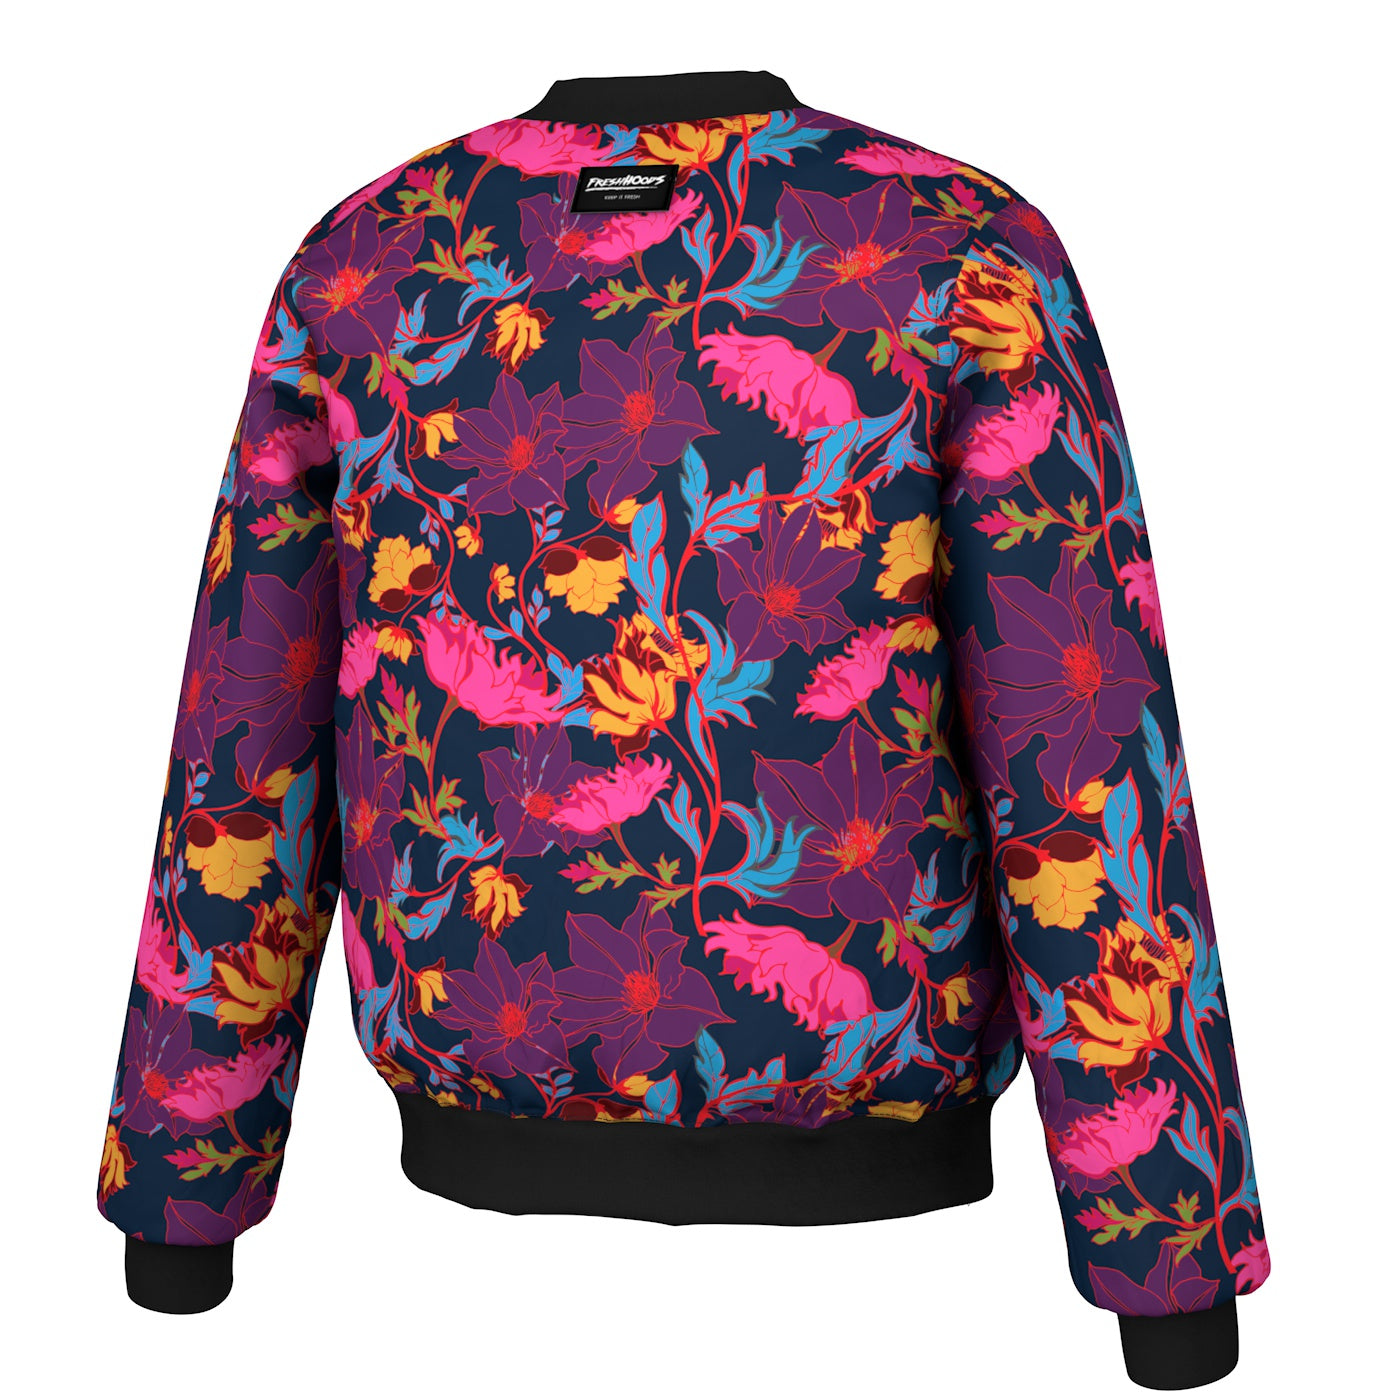 Fairy Tale Night Floral Bomber Jacket